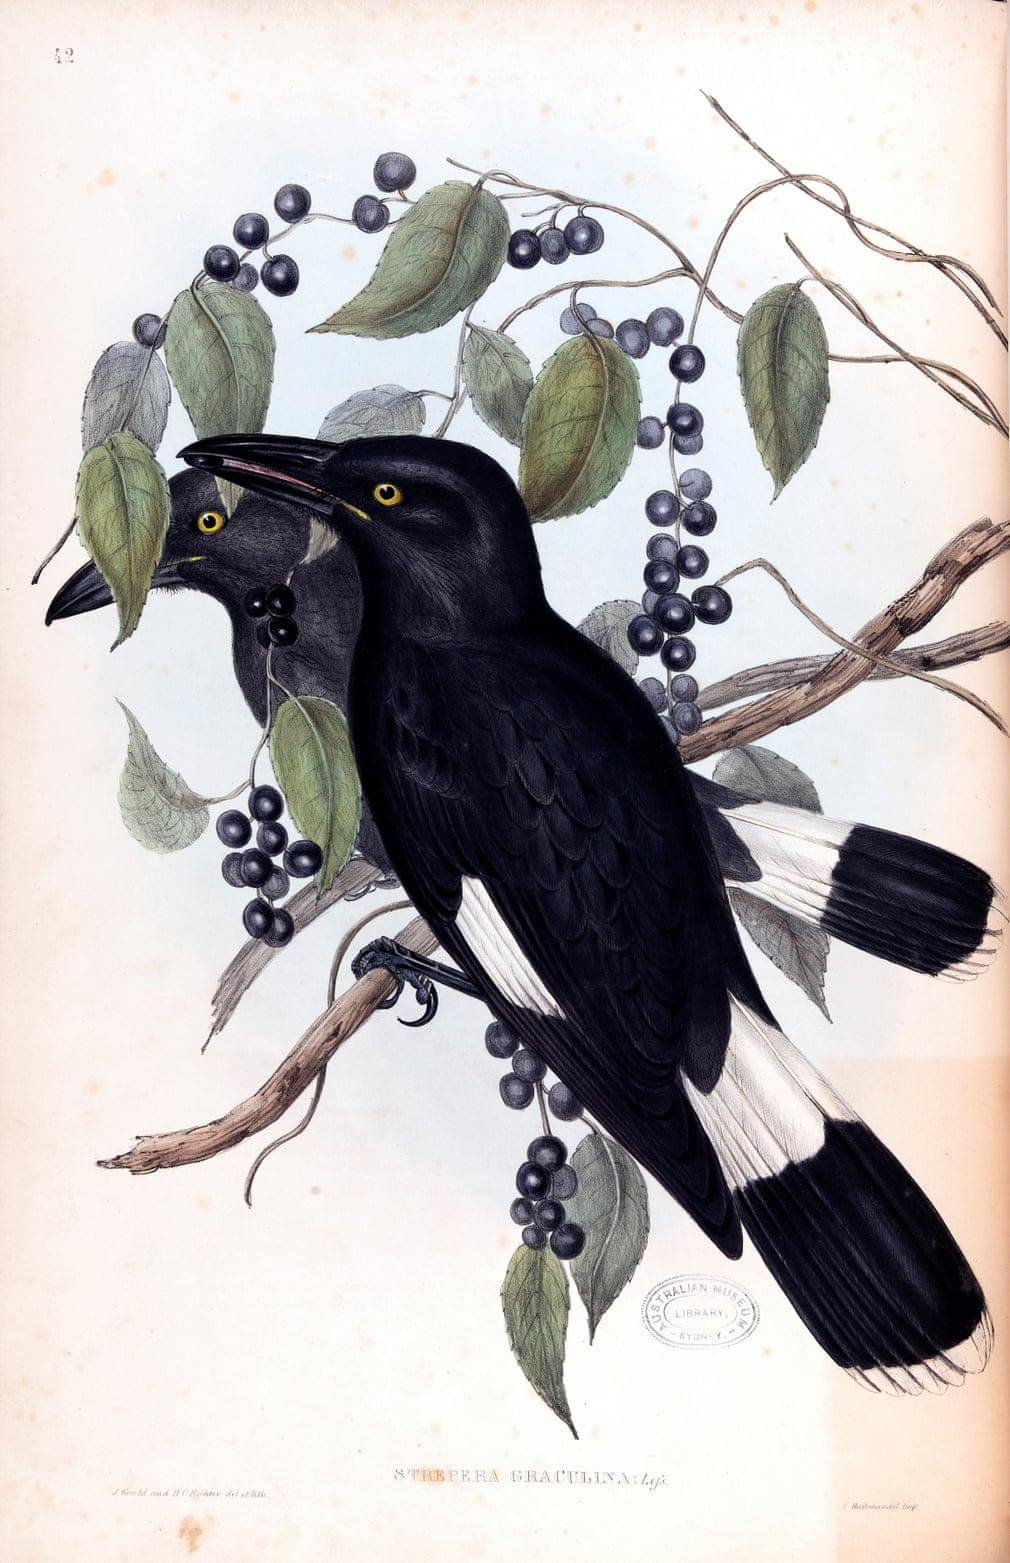 Birds Of Australia, Fascinating Illustrations From The 19th Century By Elizabeth Gould (9)